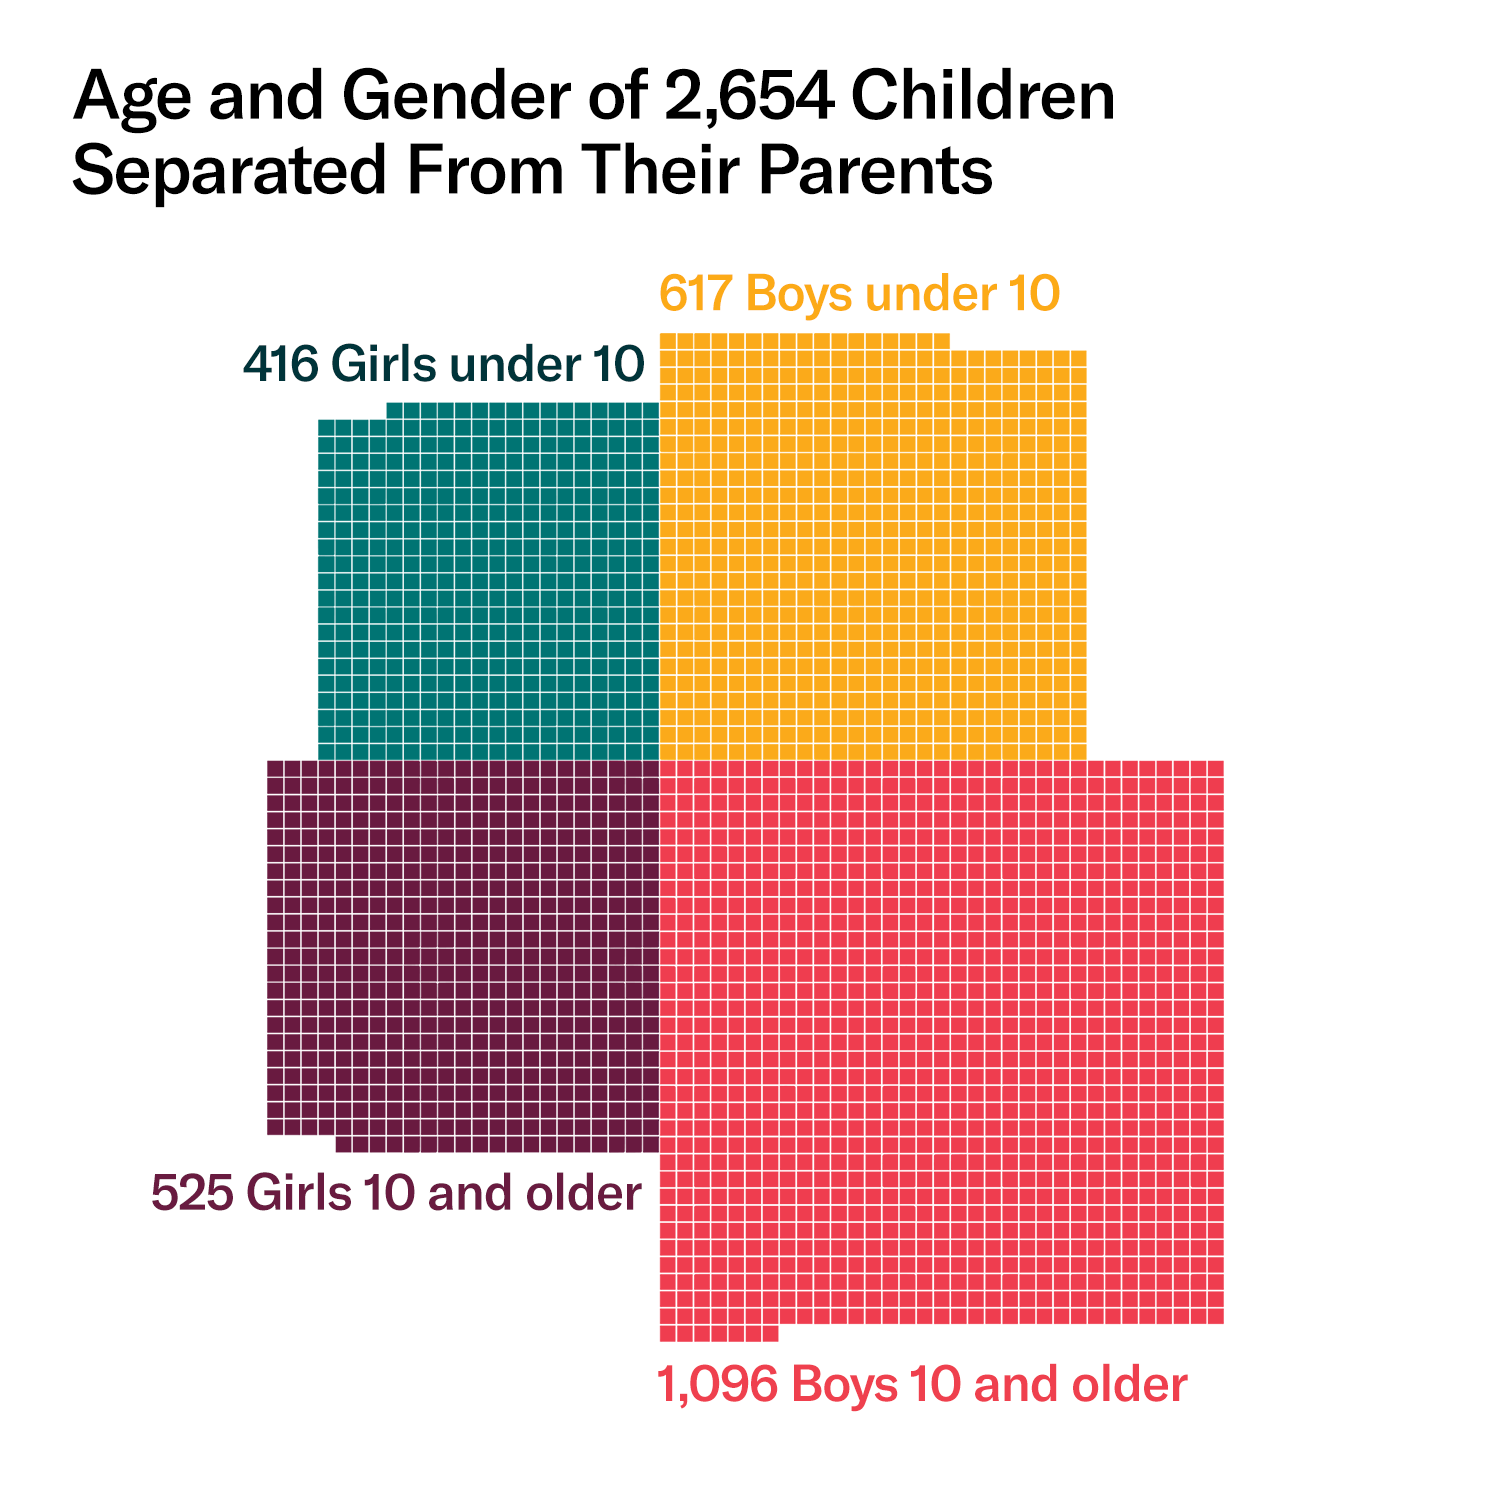 Age and Gender of 2,654 children separated from their parents - 416 girls under 10, 617 boys under 10, 525 girls 10 and over, 1,096 boys 10 and over